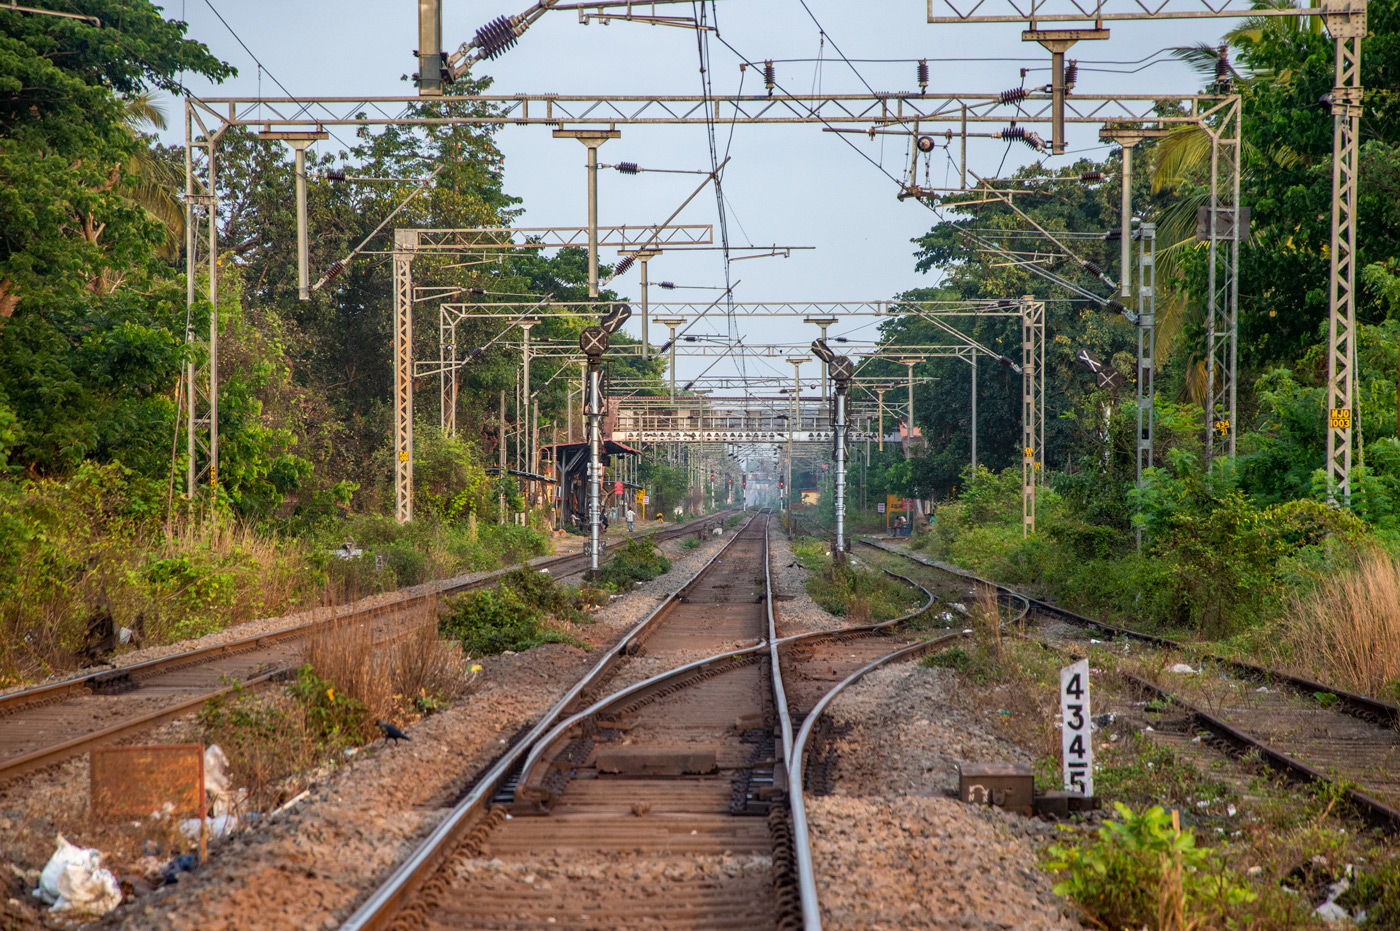 Indian Railways — Stations and stretches